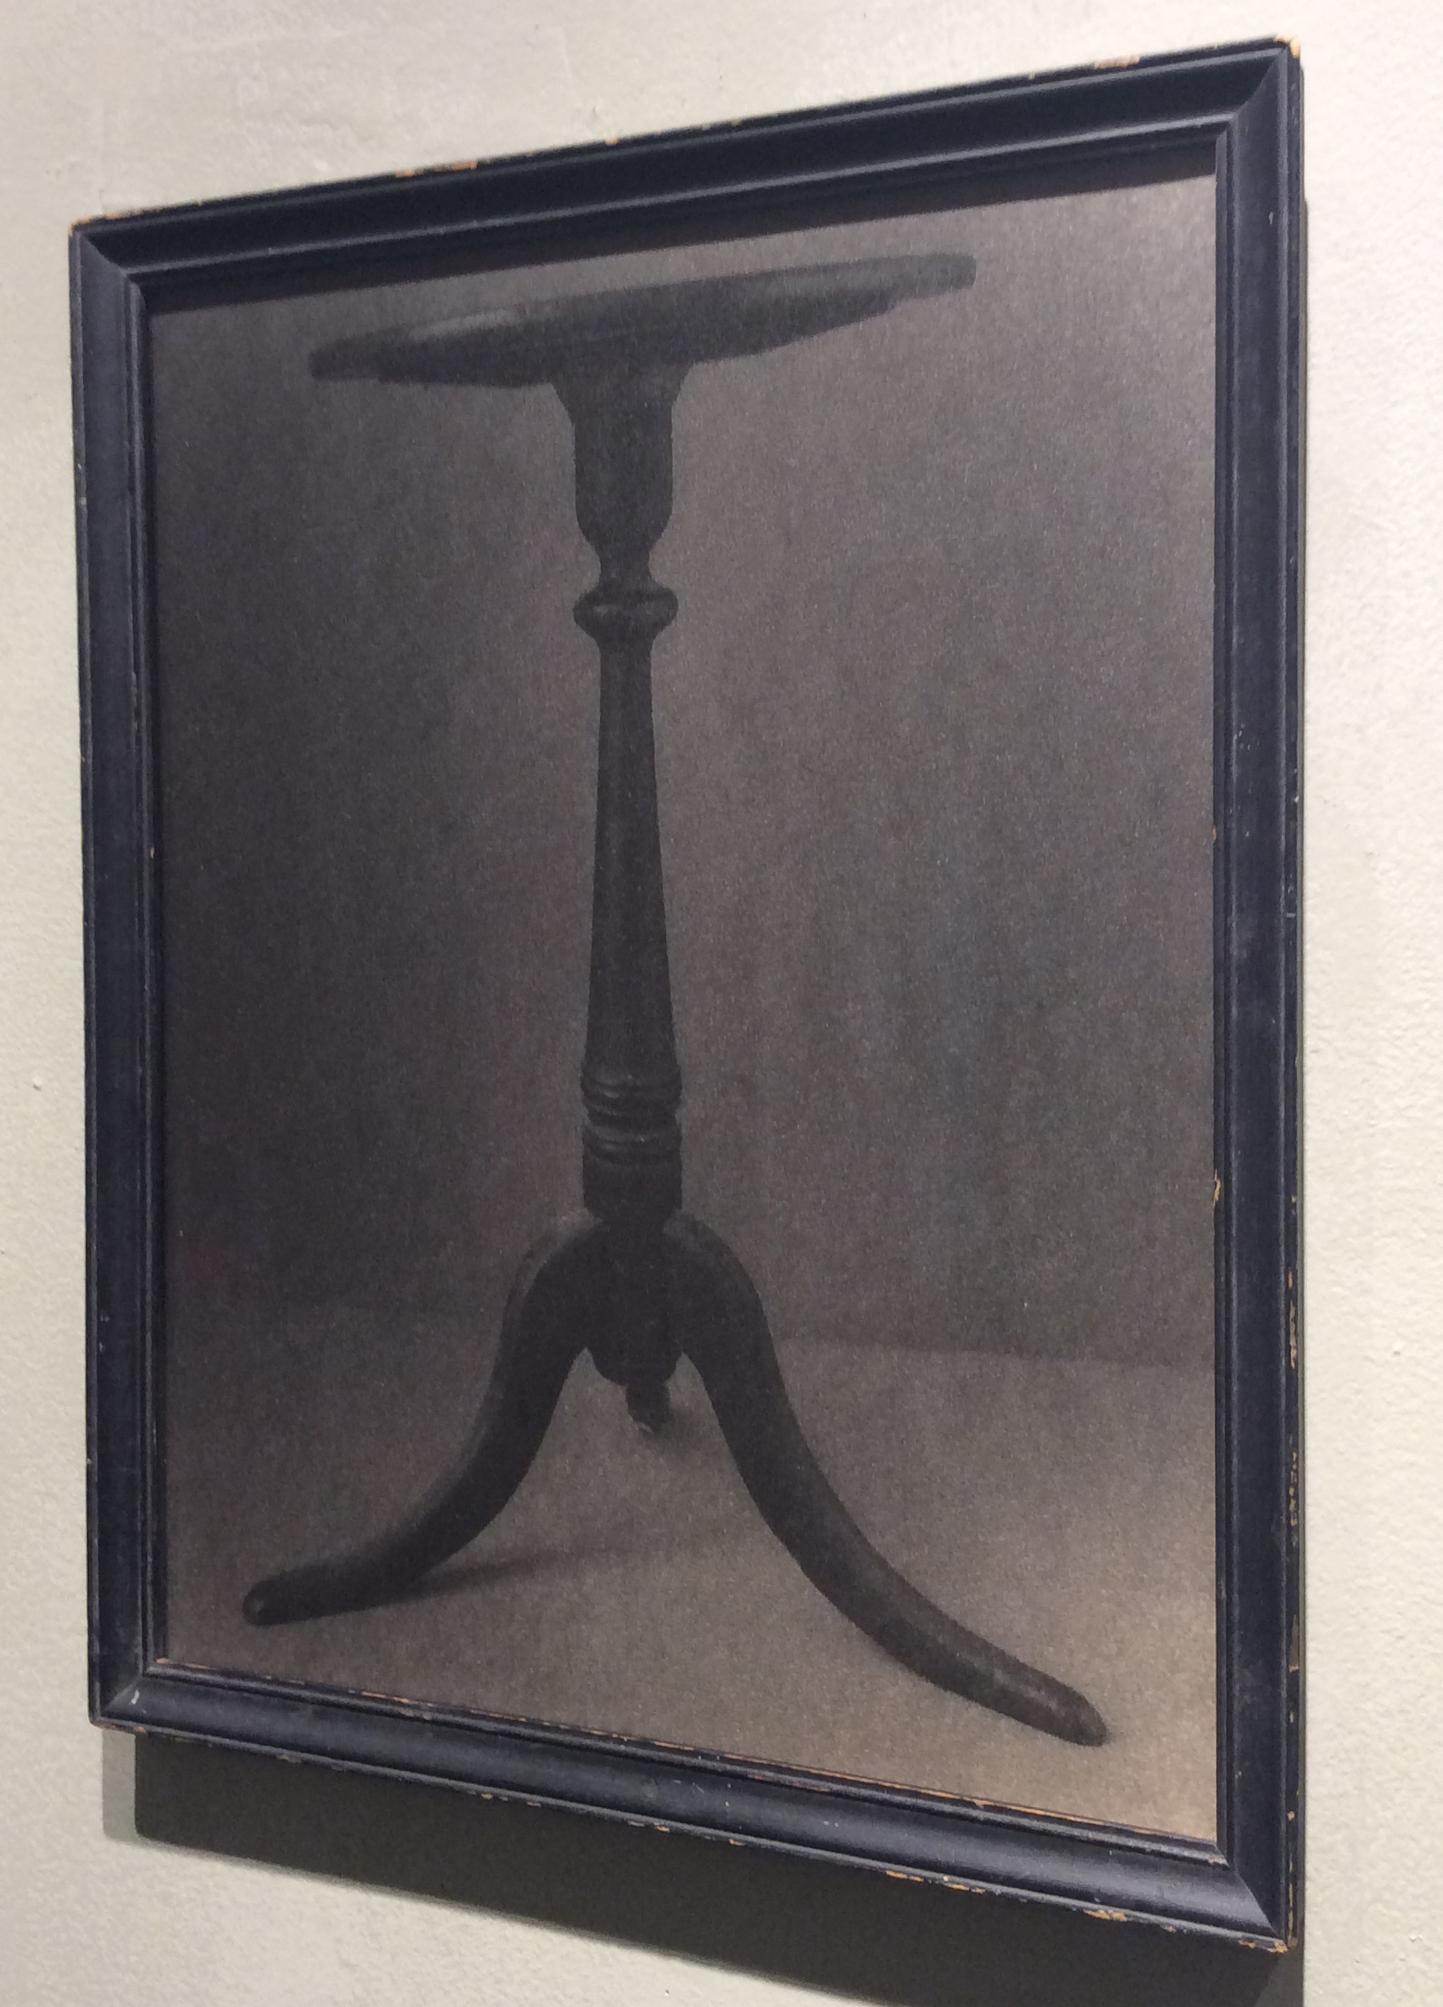 Candle Stand (Sepia Toned Still Life of Side Table in Vintage Frame) - Photograph by David Halliday